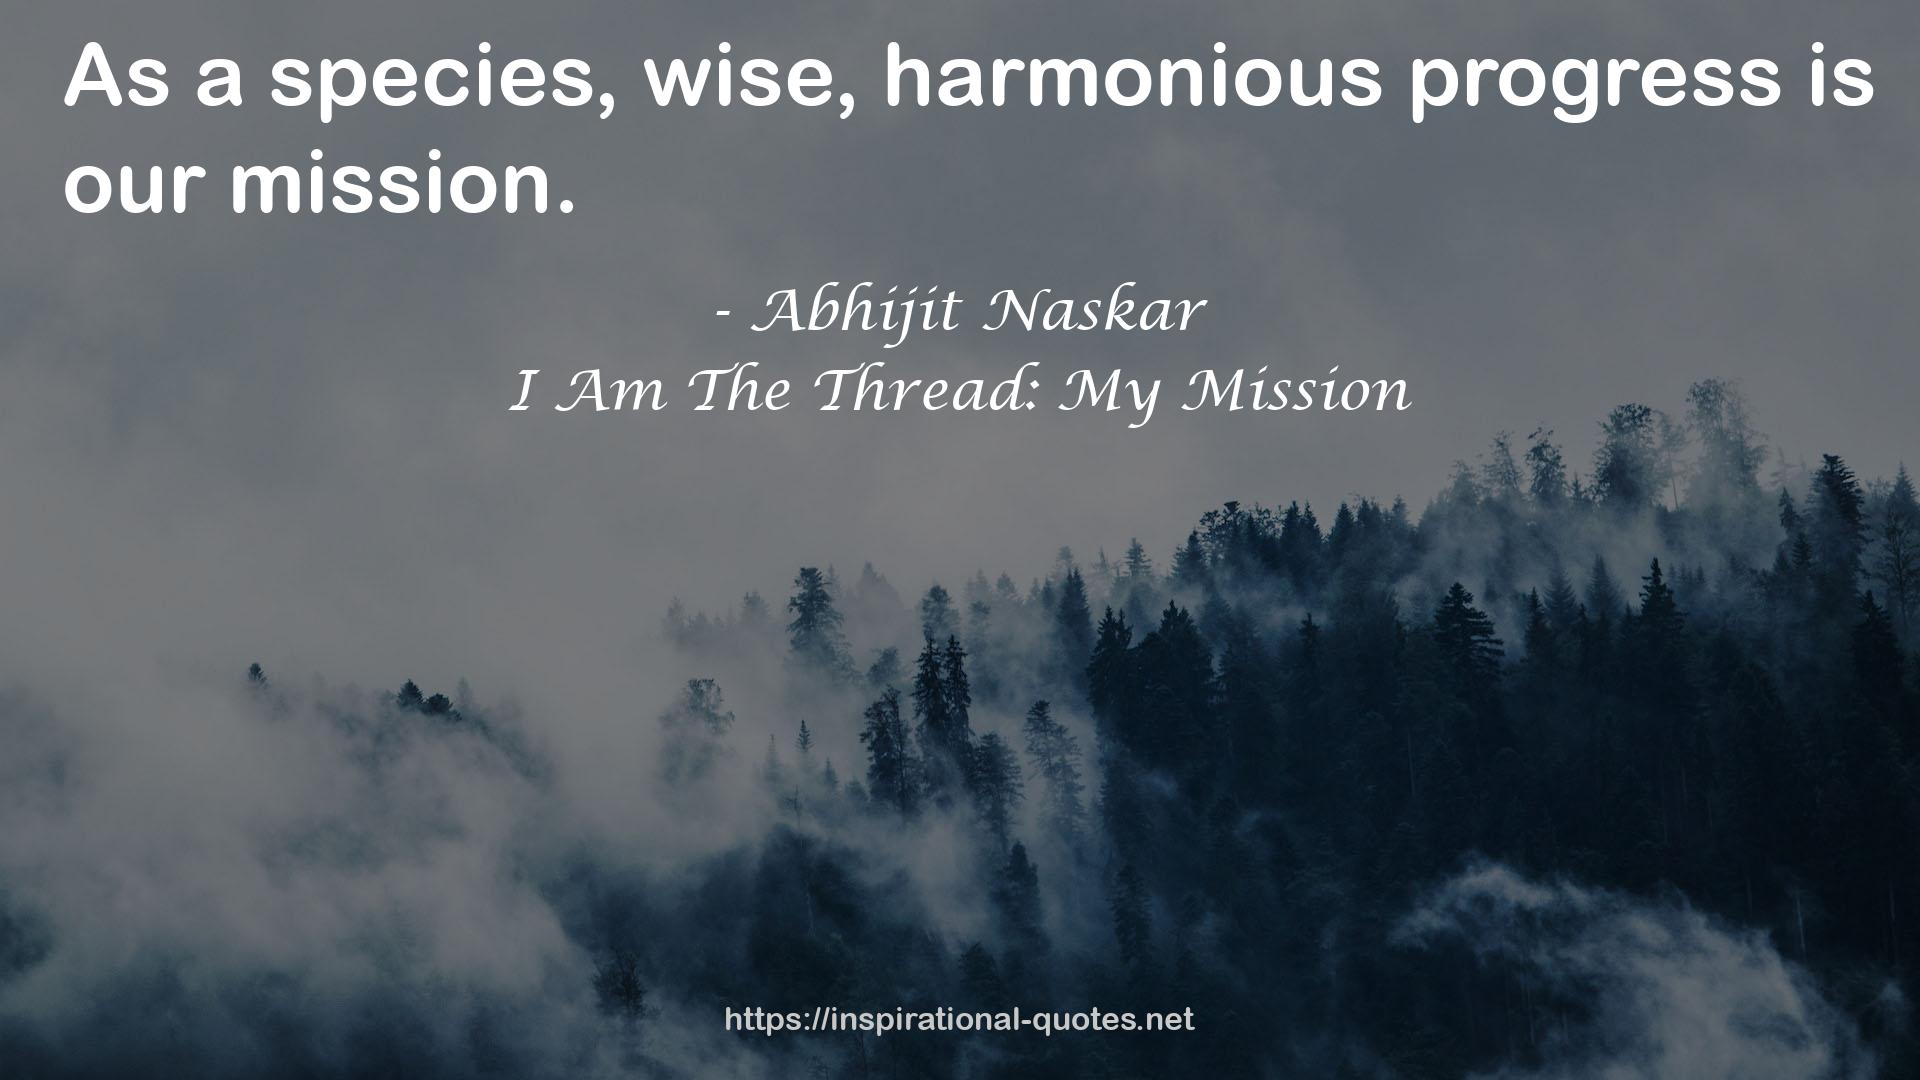 I Am The Thread: My Mission QUOTES